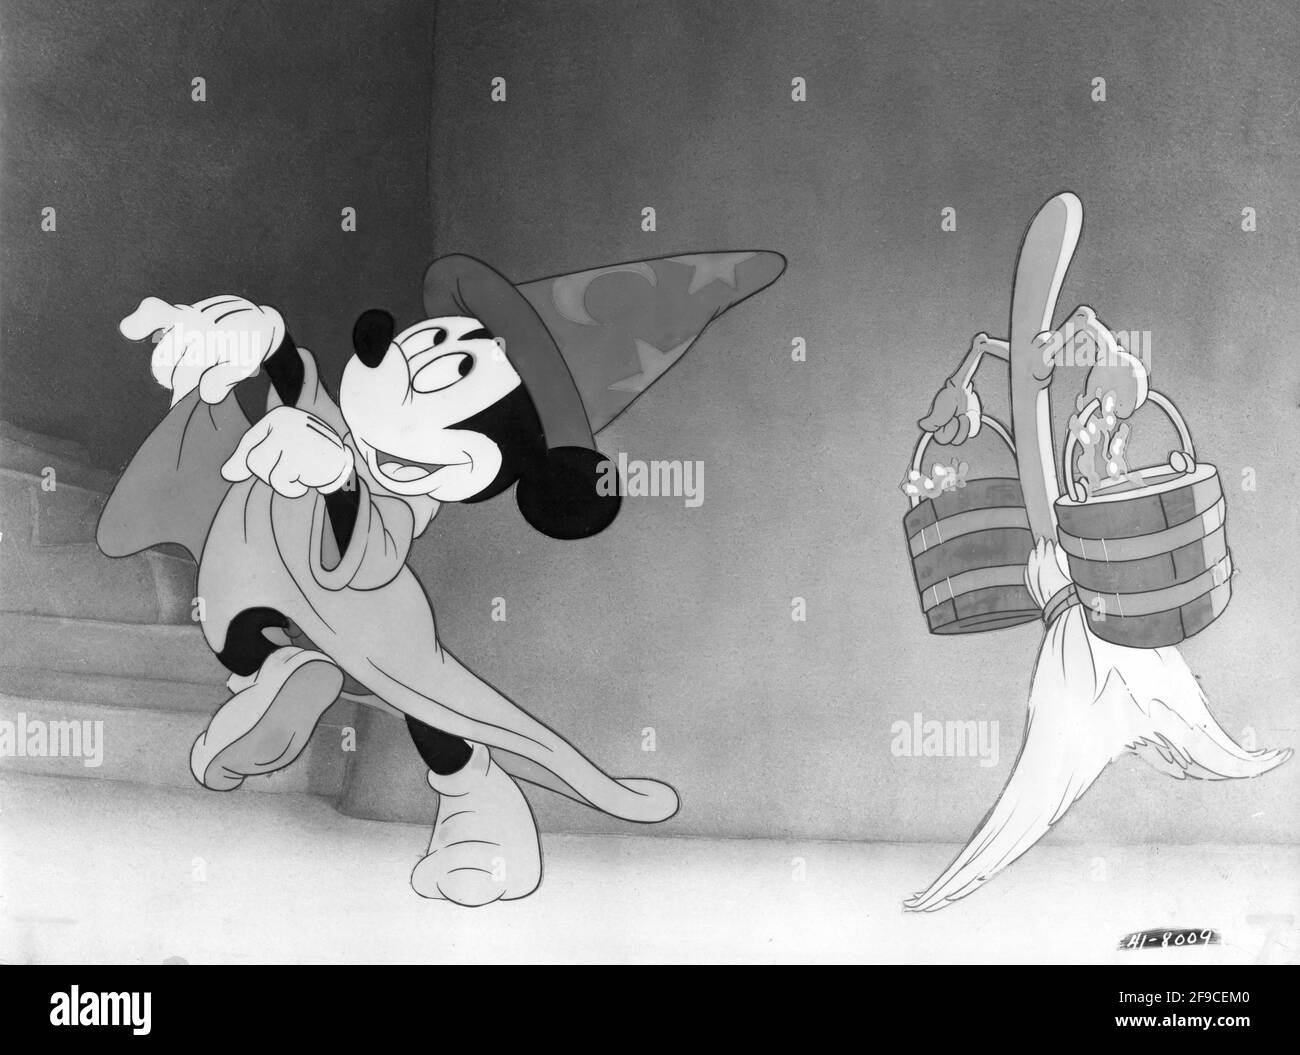 MICKEY MOUSE in The Sorcerer's Apprentice sequence with music by Paul Dukas in WALT DISNEY'S FANTASIA 1940 Leopold Stokowski and the Philadelphia Orchestra narrative introductions Deems Taylor producers Walt Disney and Ben Sharpsteen Walt Disney Productions / RKO Radio Pictures Stock Photo